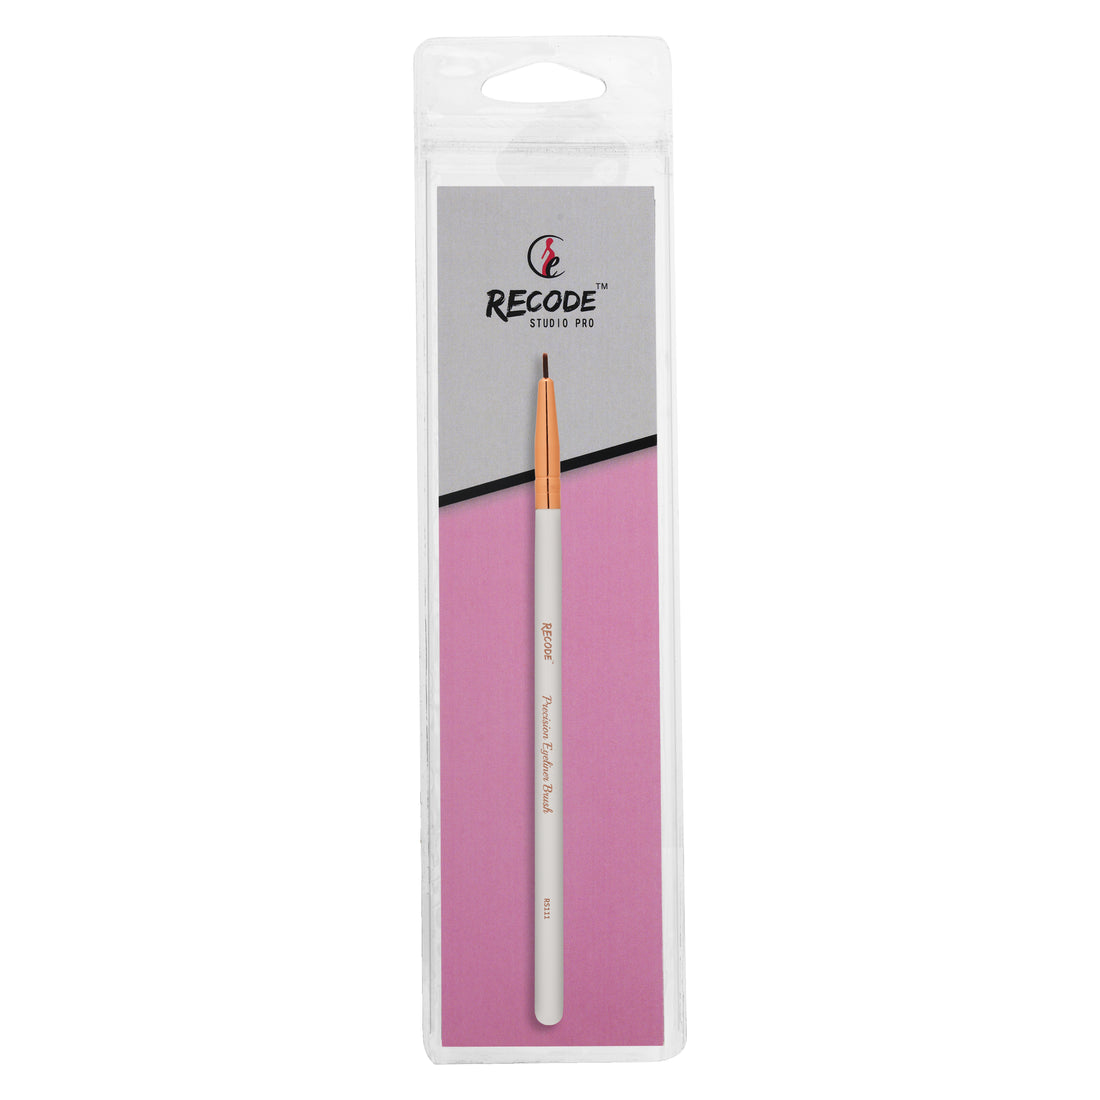 RS 111 PRECISION EYELINER BRUSH - RECODE RS 111